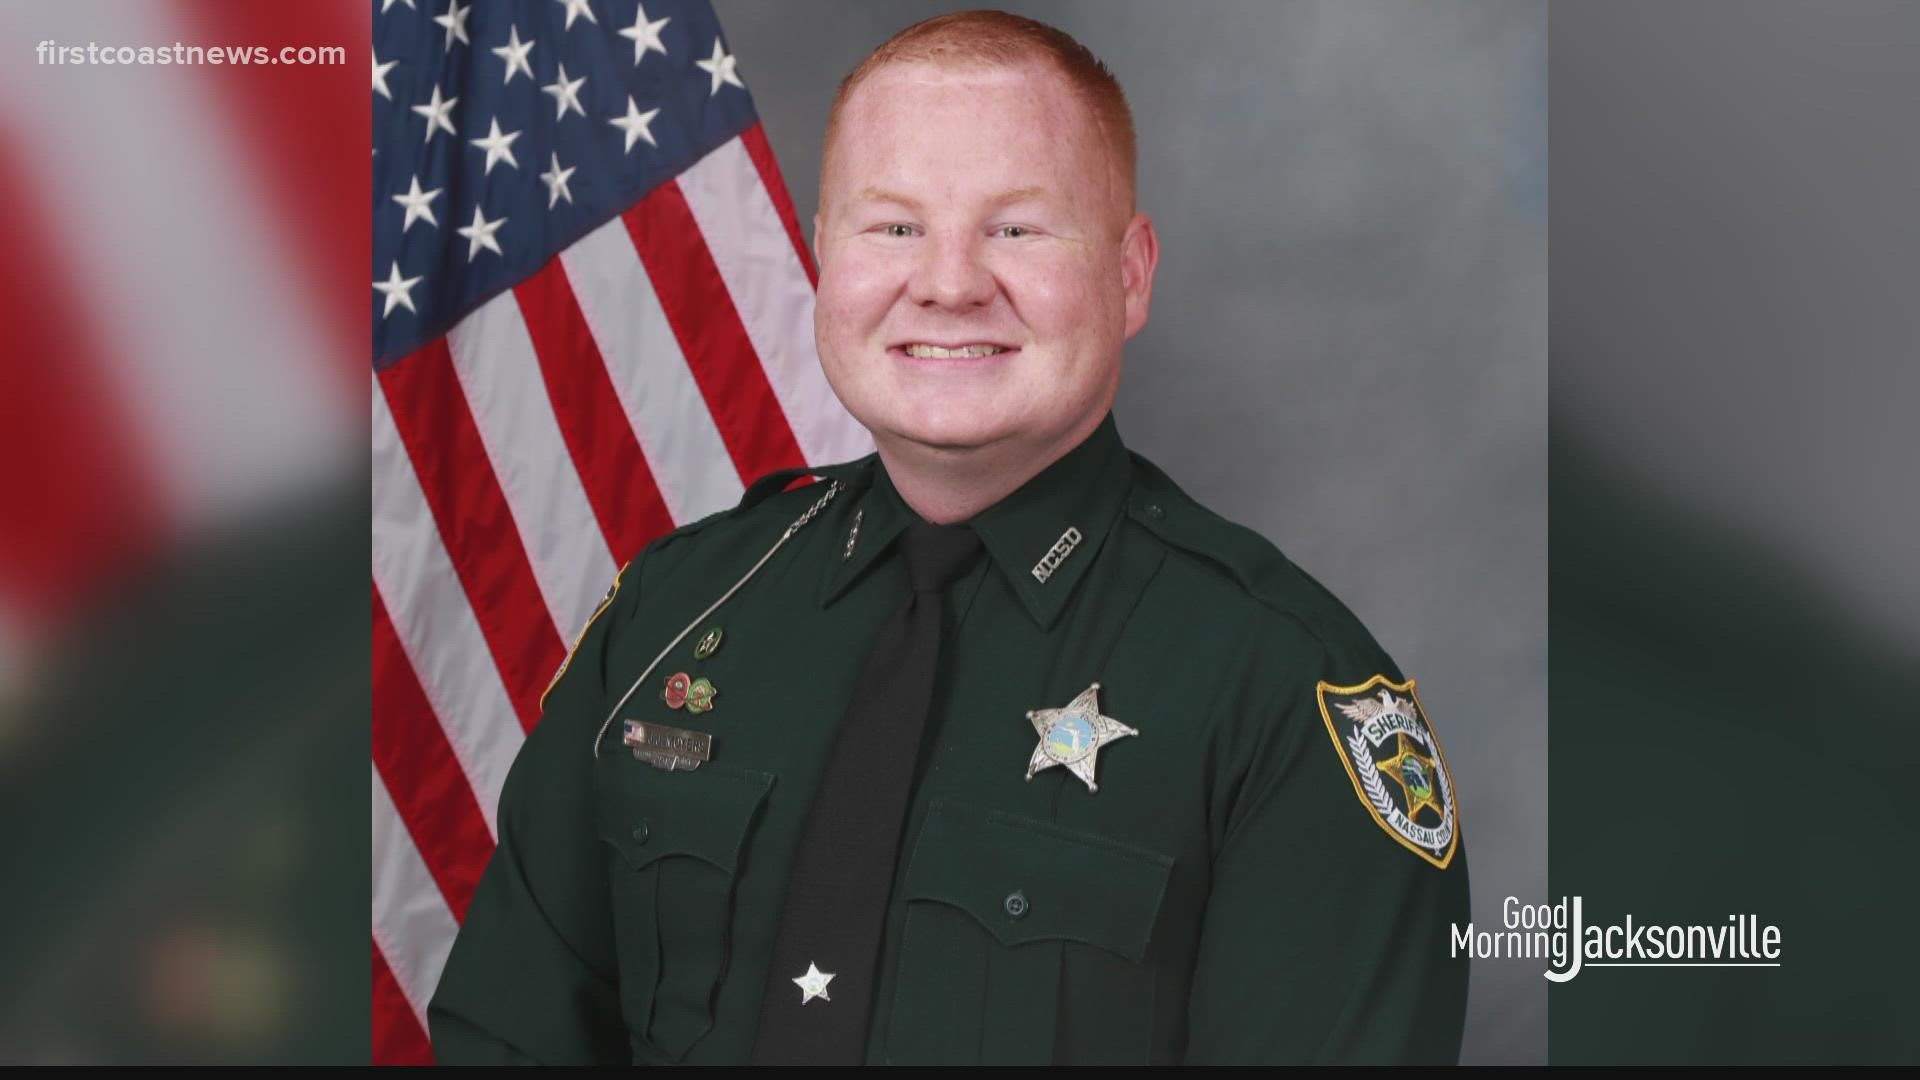 Deputy Josh Moyers died after a shooting during a traffic stop, the Nassau County Sheriff's Office says. Former Marine Patrick McDowell is accused in the shooting.